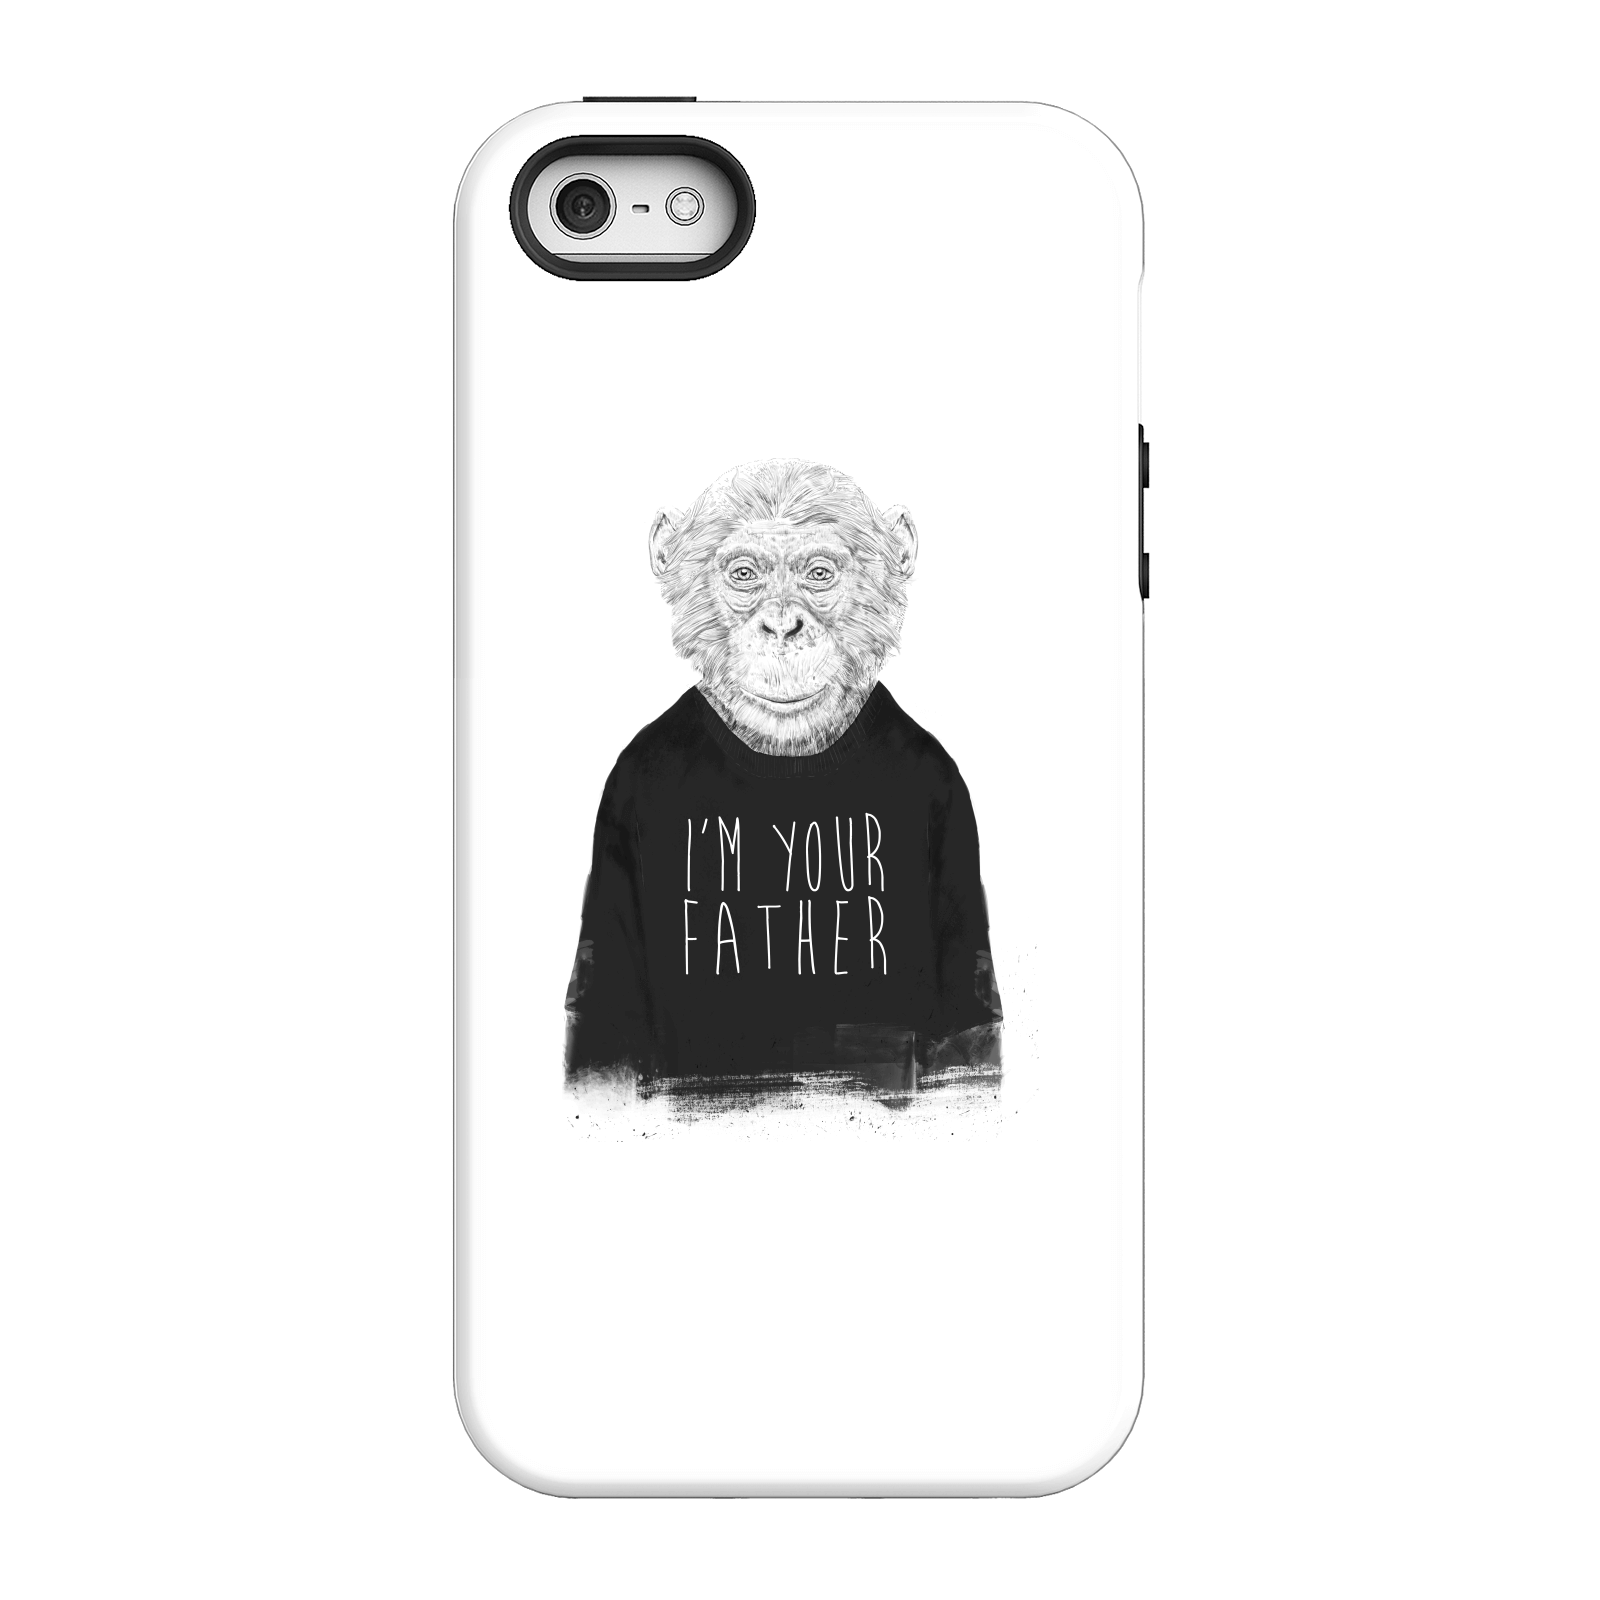 Balazs Solti I'm Your Father Phone Case for iPhone and Android - iPhone 5/5s - Tough Case - Gloss